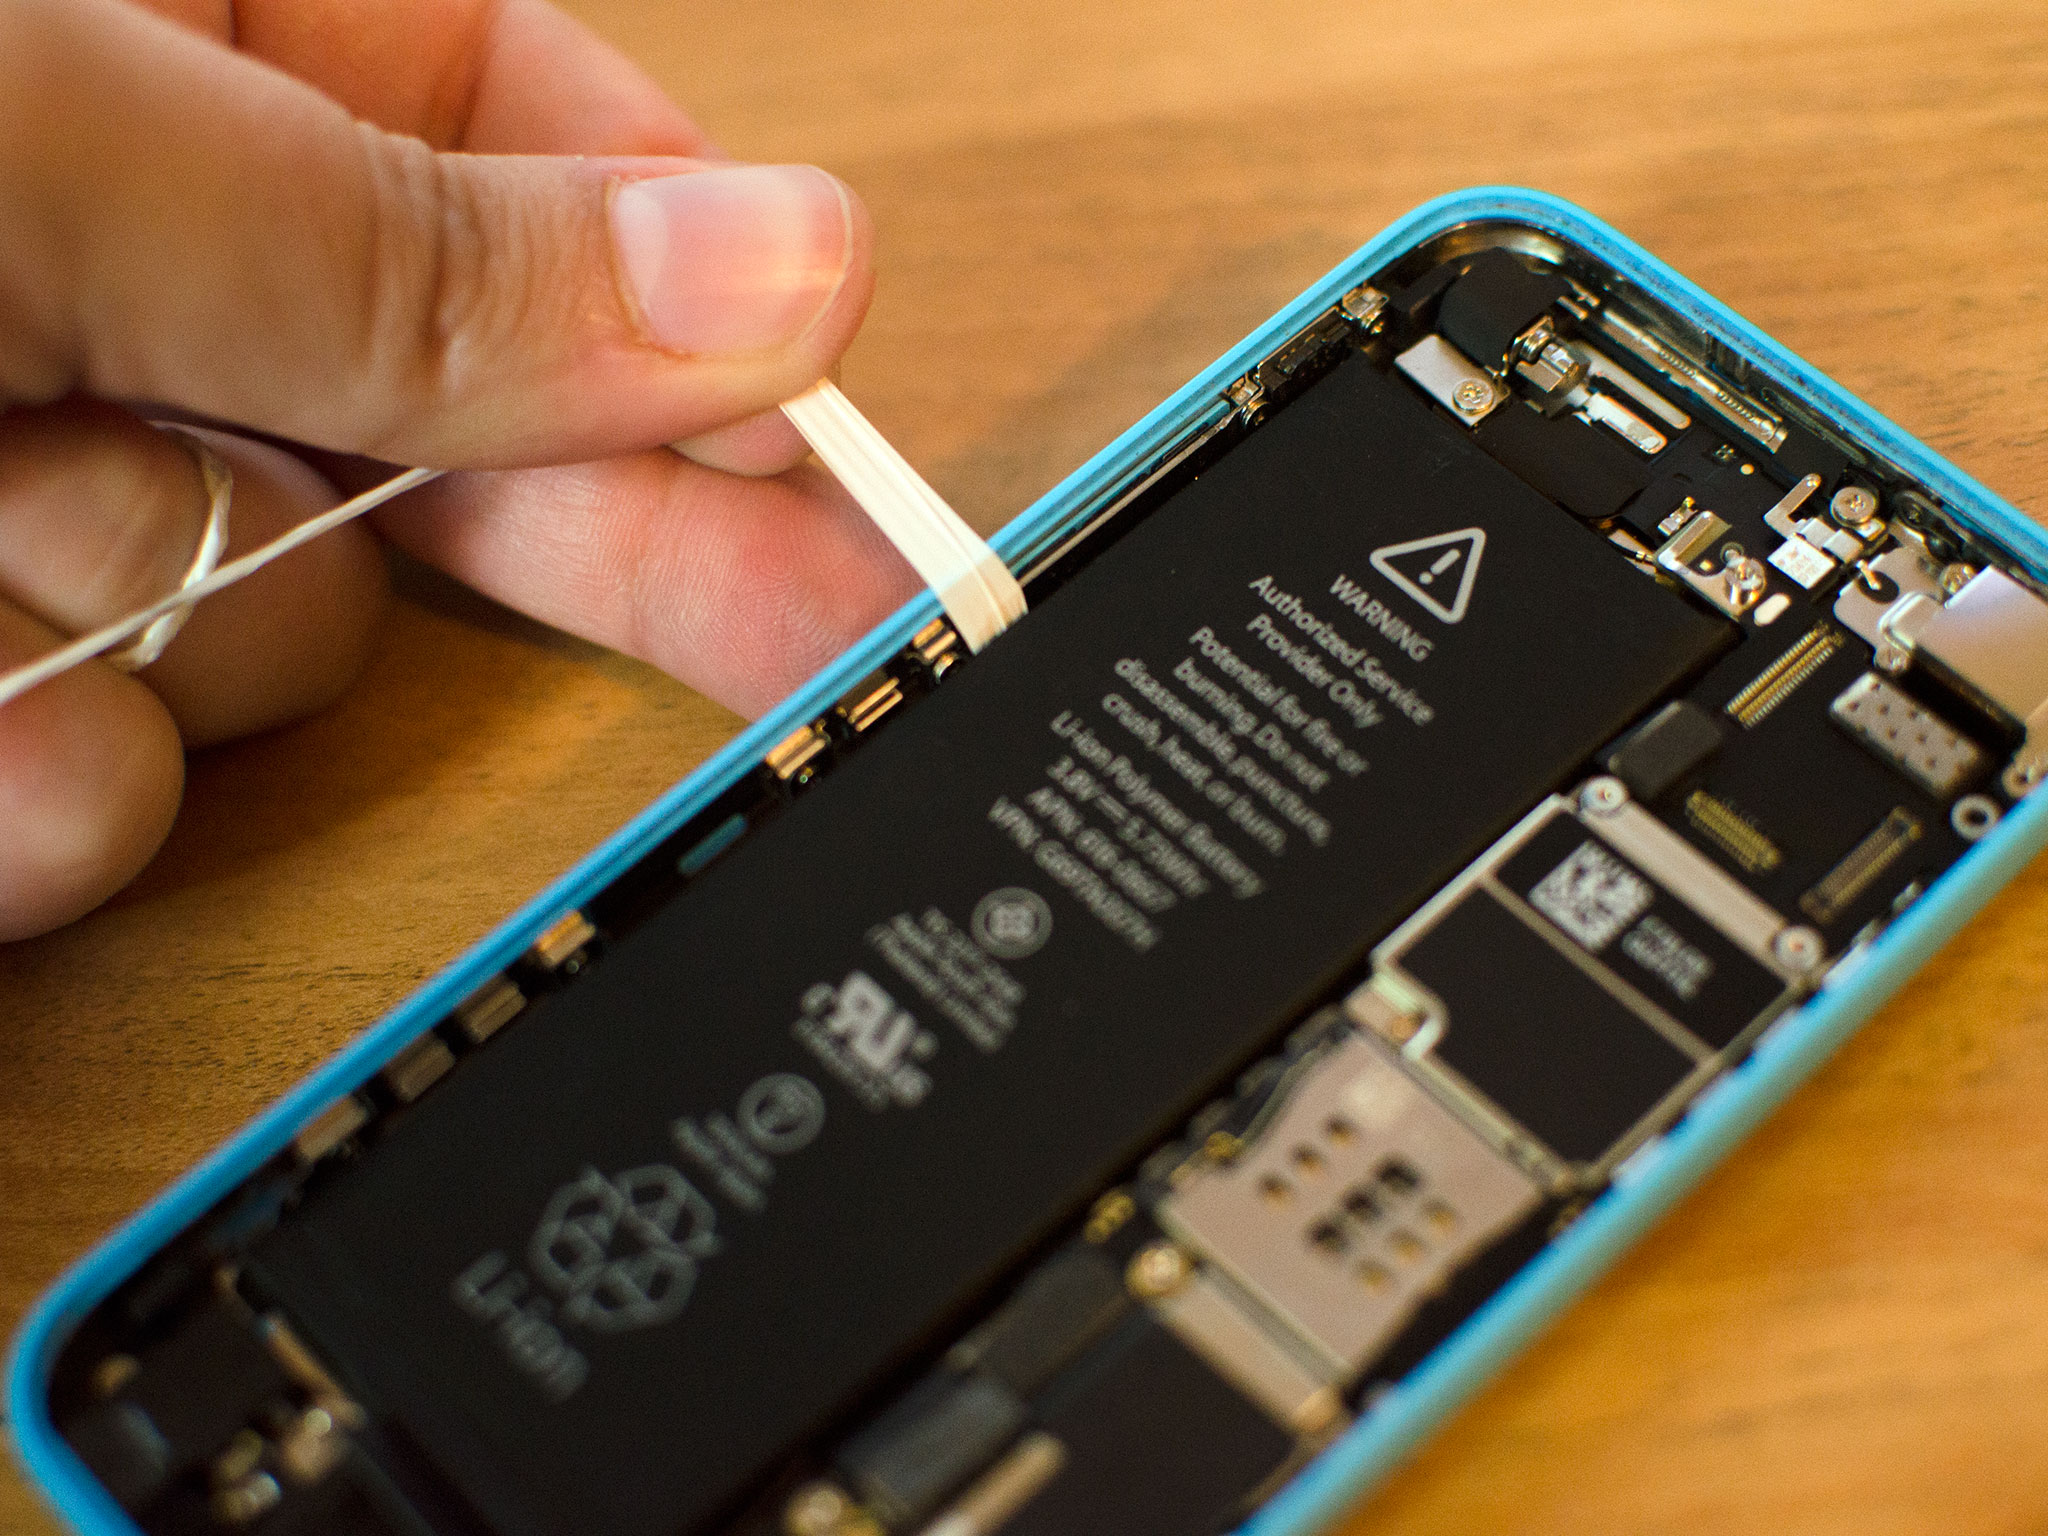 How To Replace Your Iphone Battery The Ultimate Guide ...